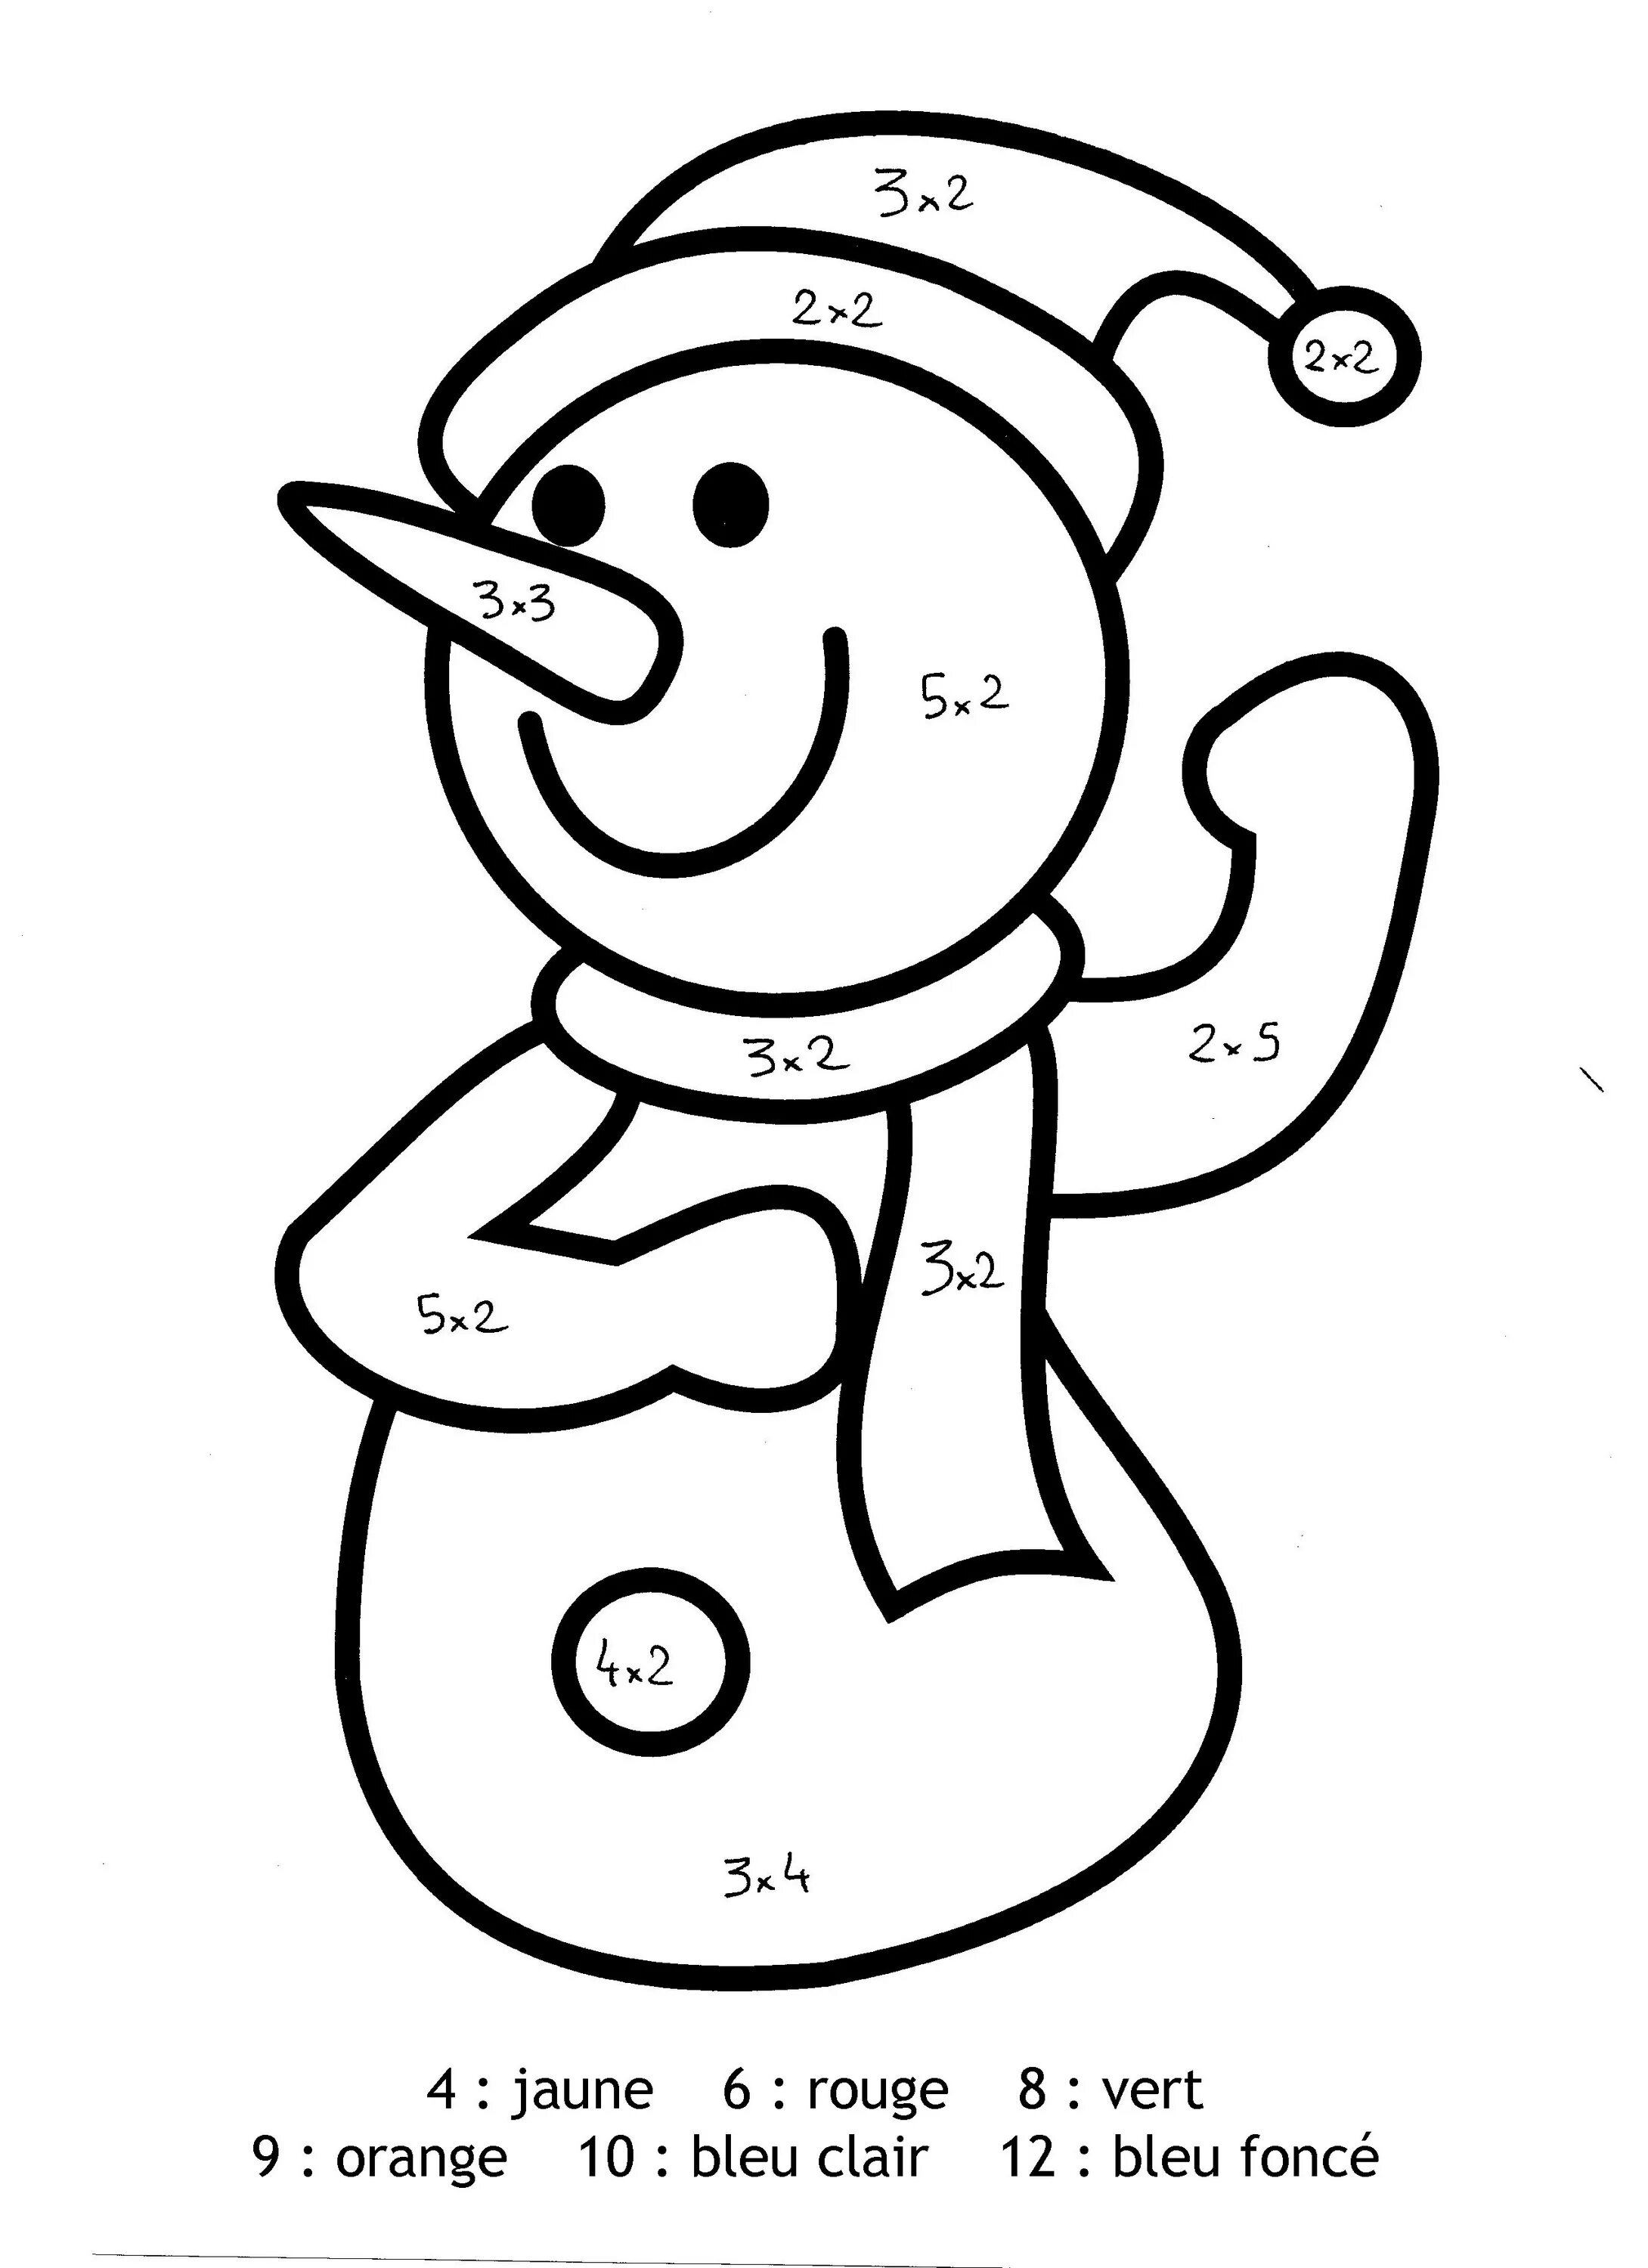 Snowman with examples #7